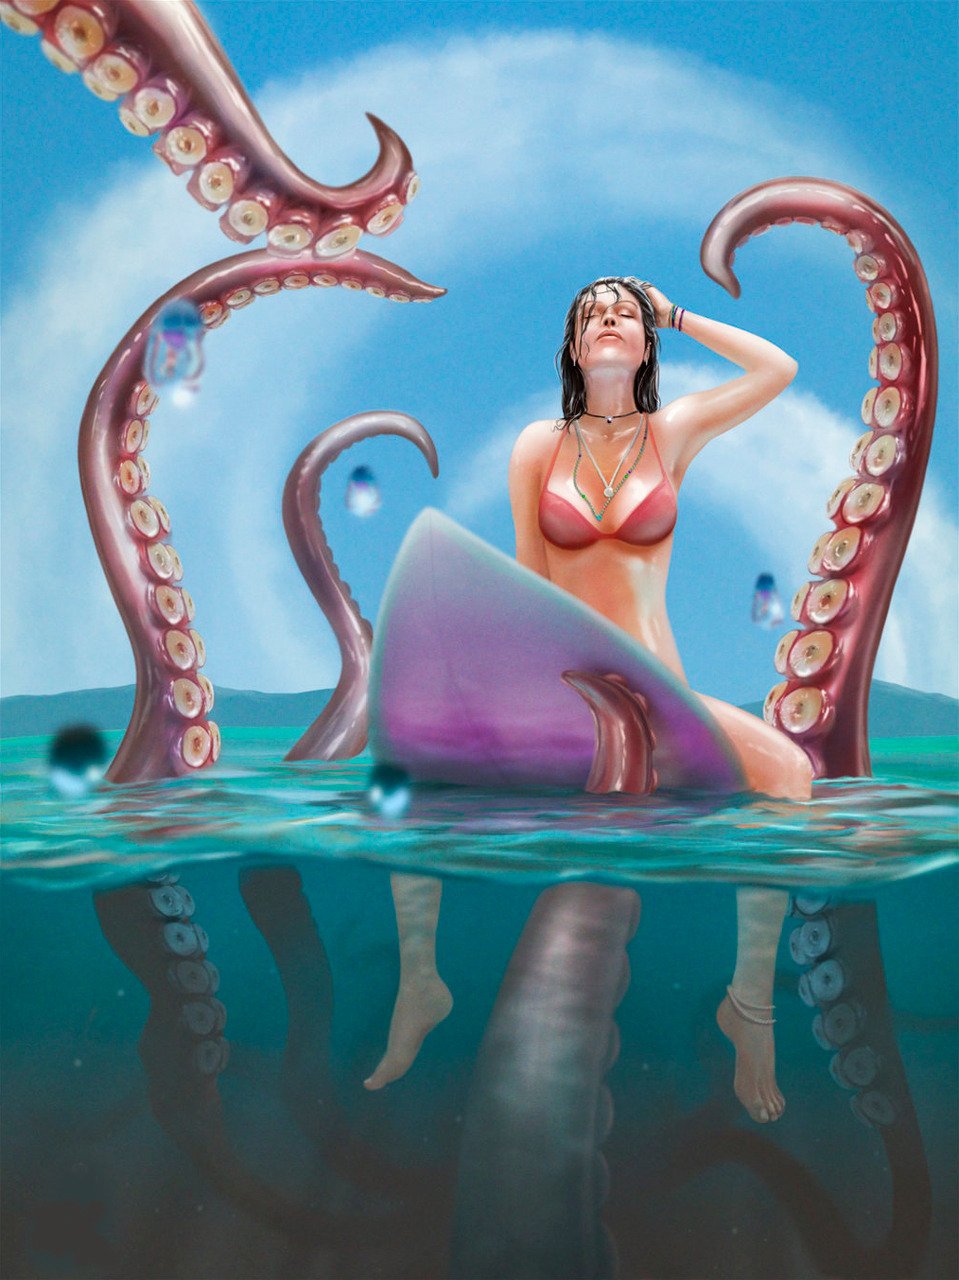 female surfer and giant octopus (Jaws) by Andy Fairhurst